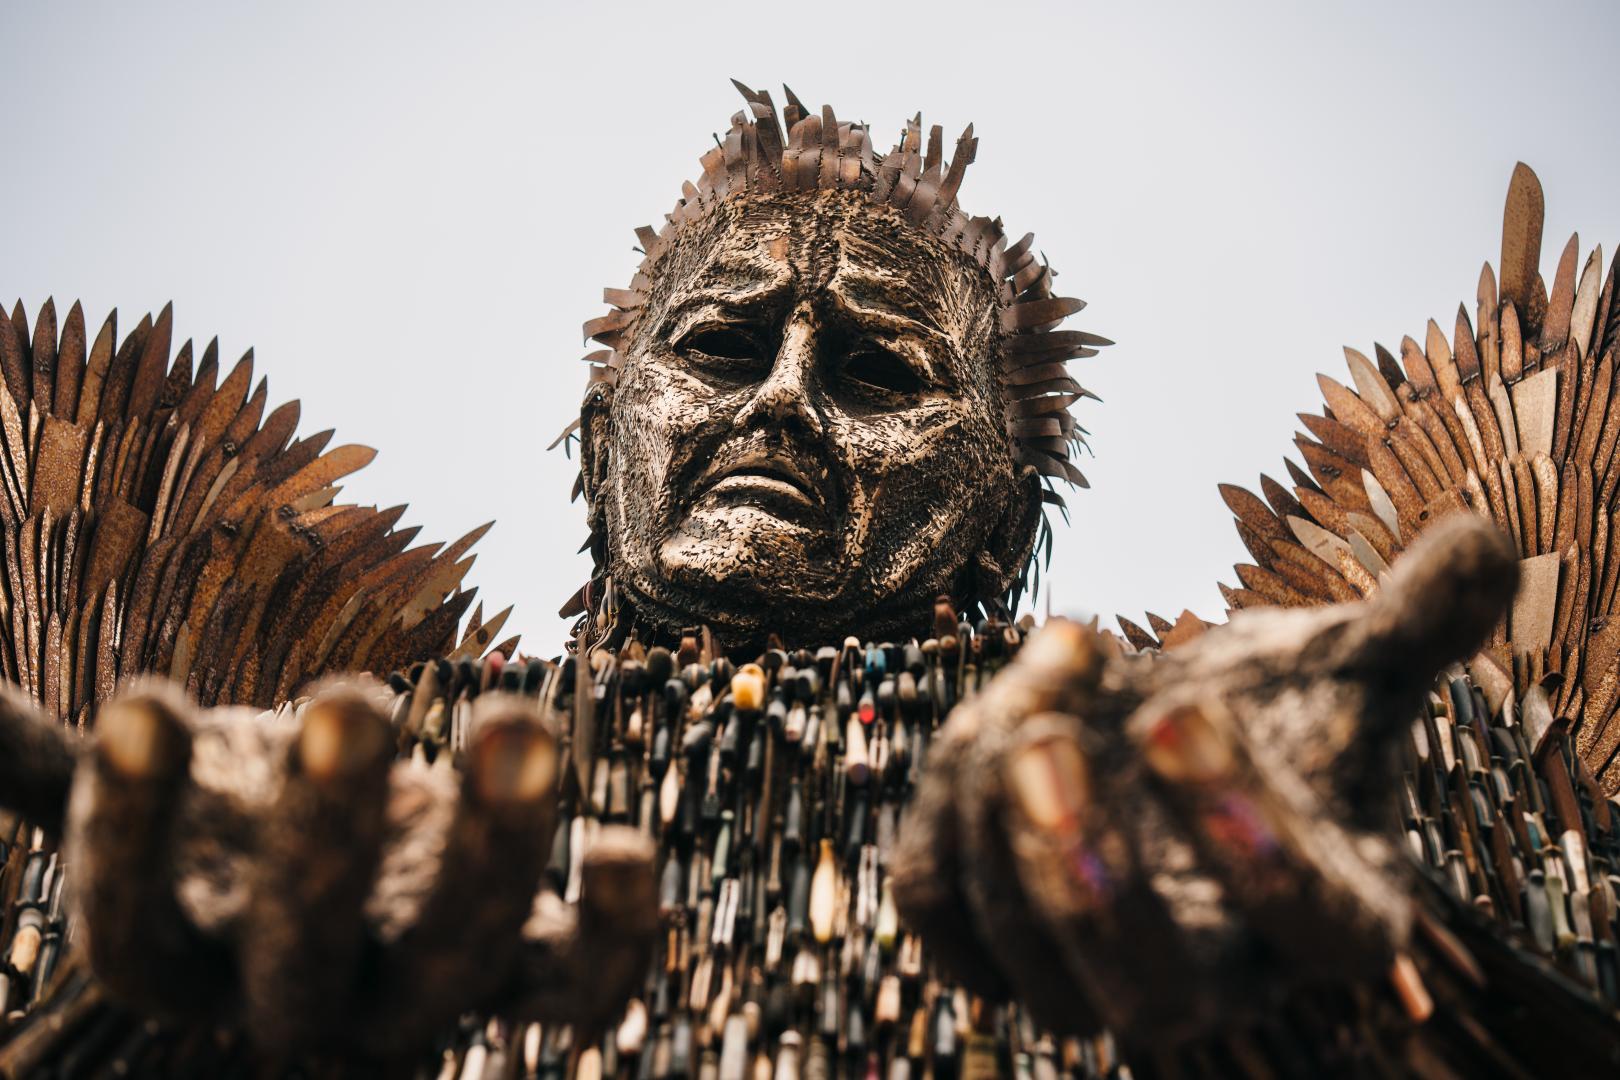 The Knife Angel shot from the ground, with its hands outstretched towards the camera. 